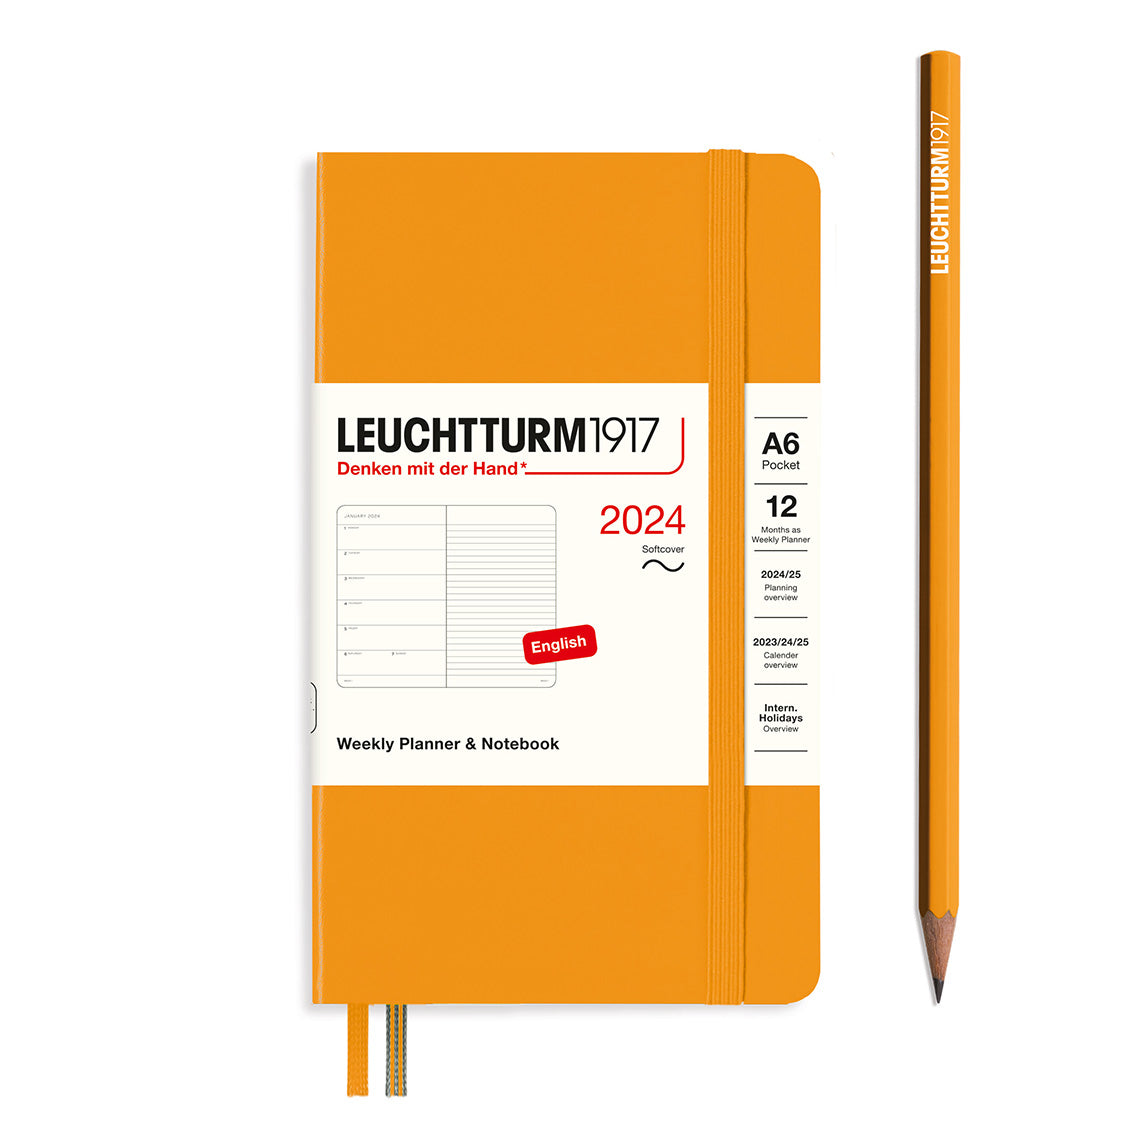 An image of an orange planner with an orange elastic band holding it together and a cream paper wrap around the middle stating the business name Leuchtturm1917, that it is for the year 2024, it is a weekly planner and notebook, is A6 in size and an English language version. It has an image on the wrap showing the inside layout which is a week on the left hand page and a notes page on thr right hand page. An orange pencil is shown at the side of the planner.